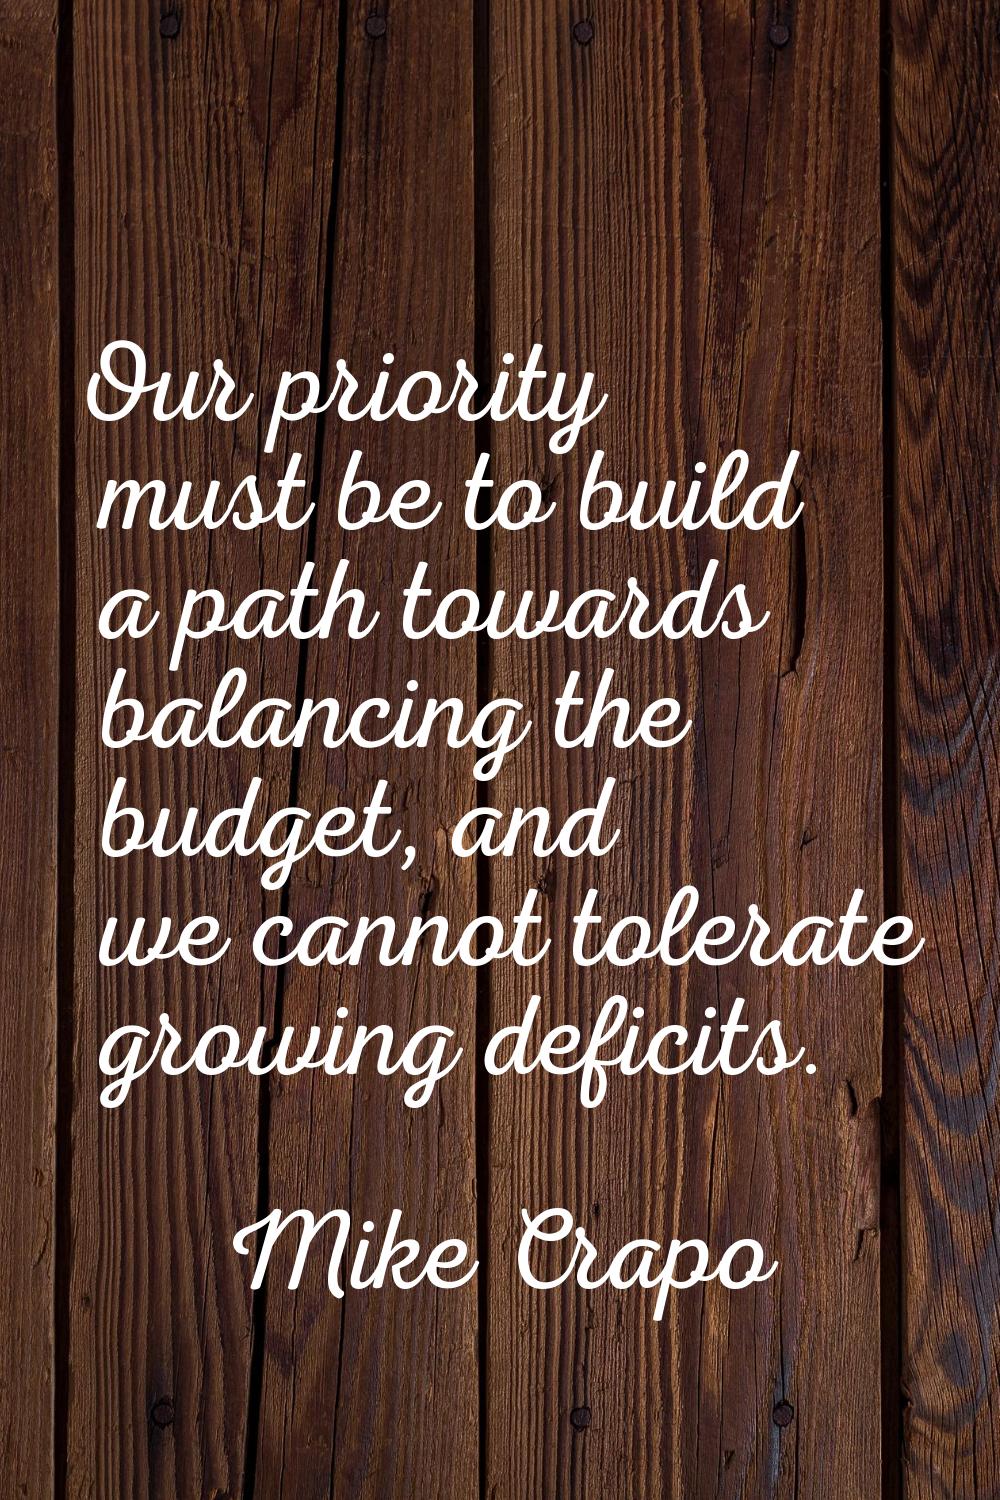 Our priority must be to build a path towards balancing the budget, and we cannot tolerate growing d